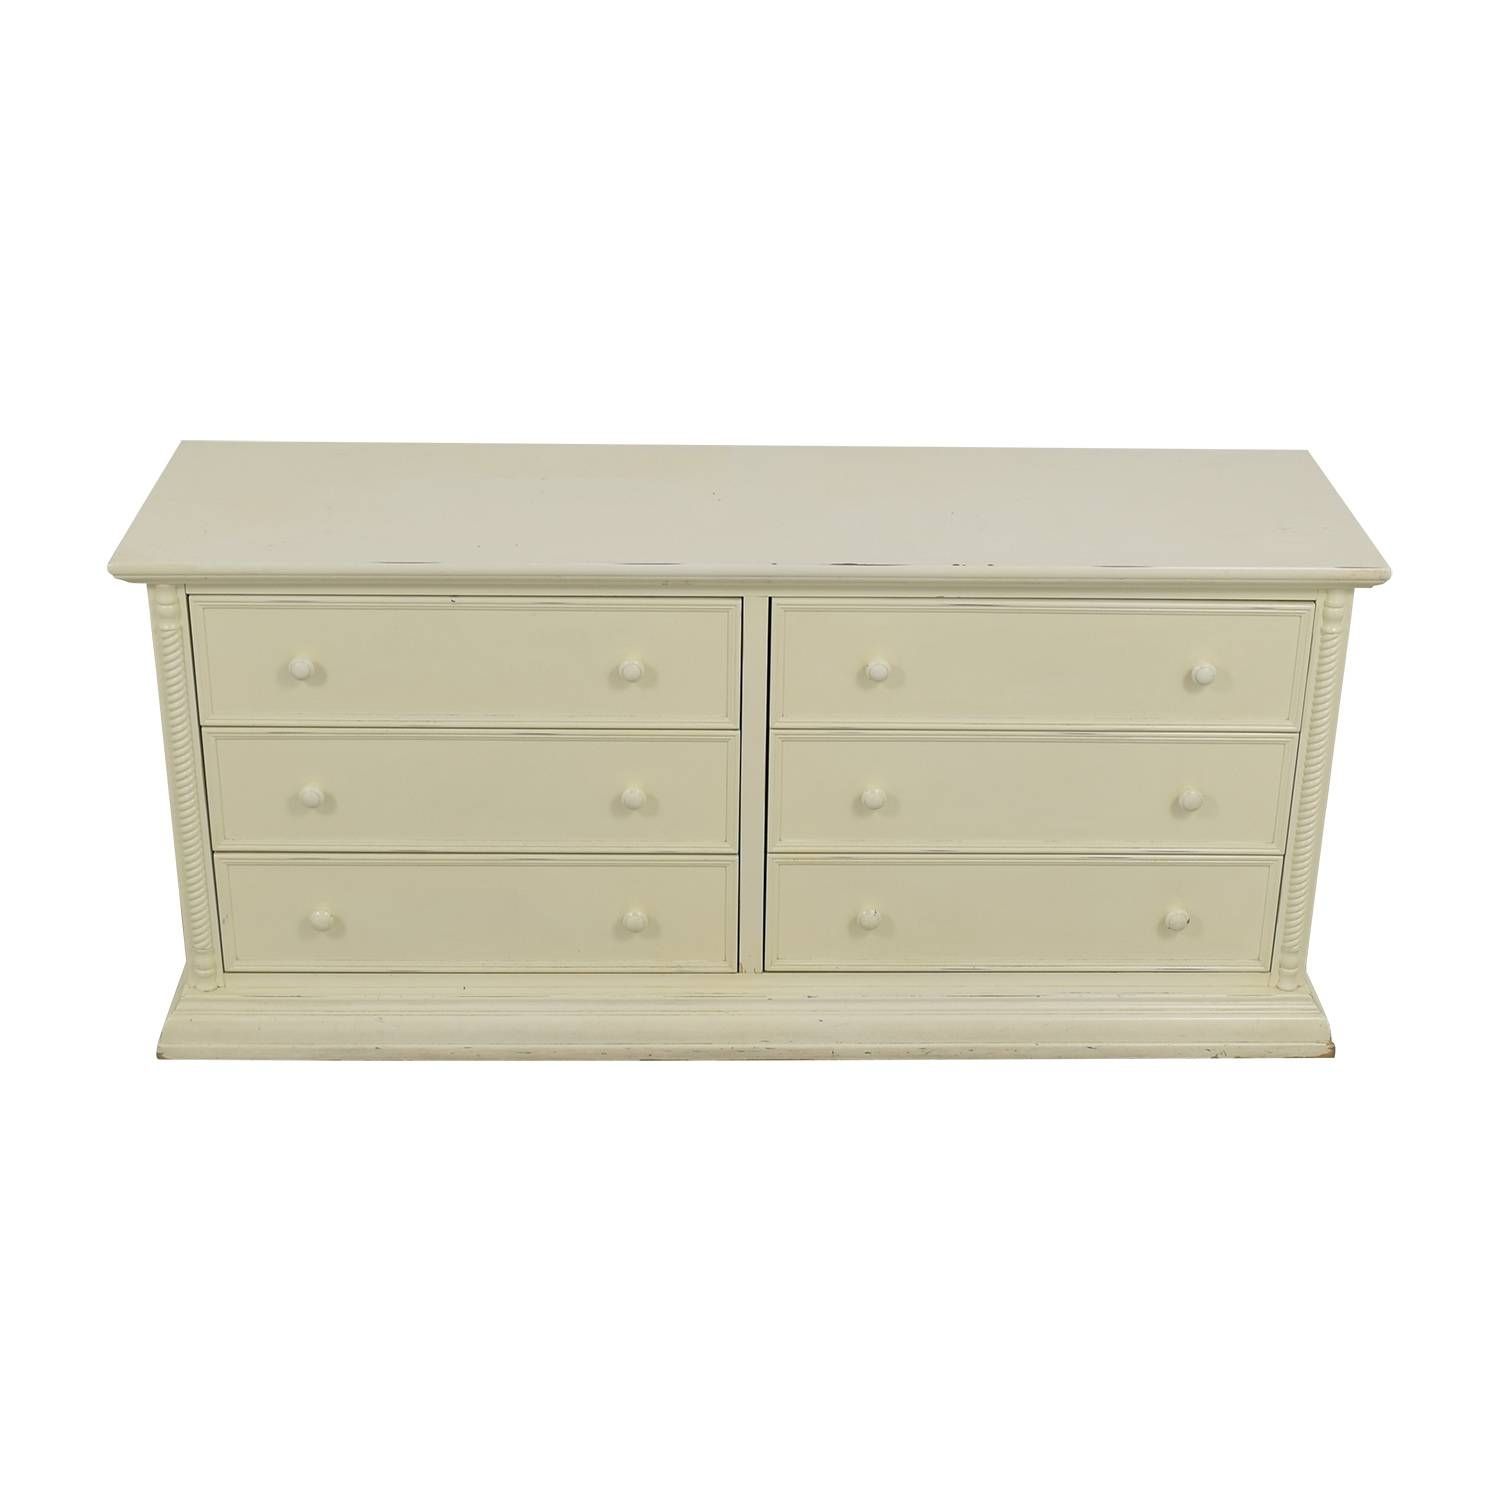 78% Off – Bellini Bellini White Dresser / Storage Intended For Second Hand Dressers And Sideboards (Photo 7 of 15)